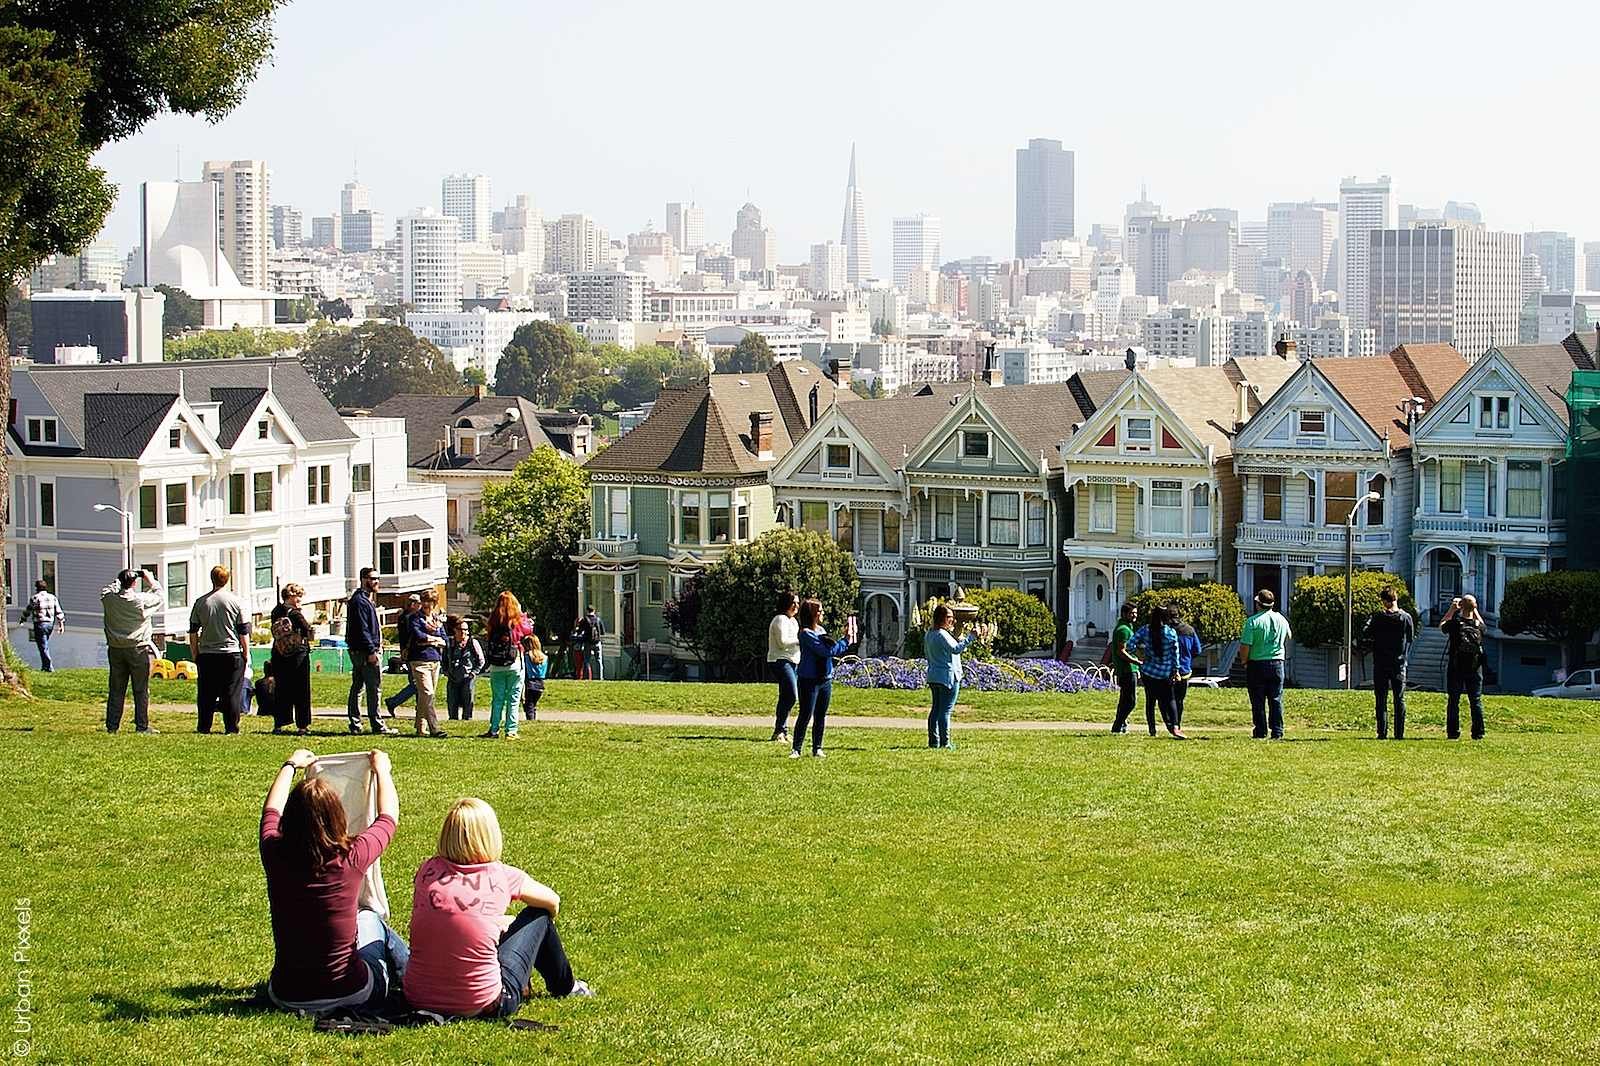 The Painted Ladies at Alamo Square in San Francisco